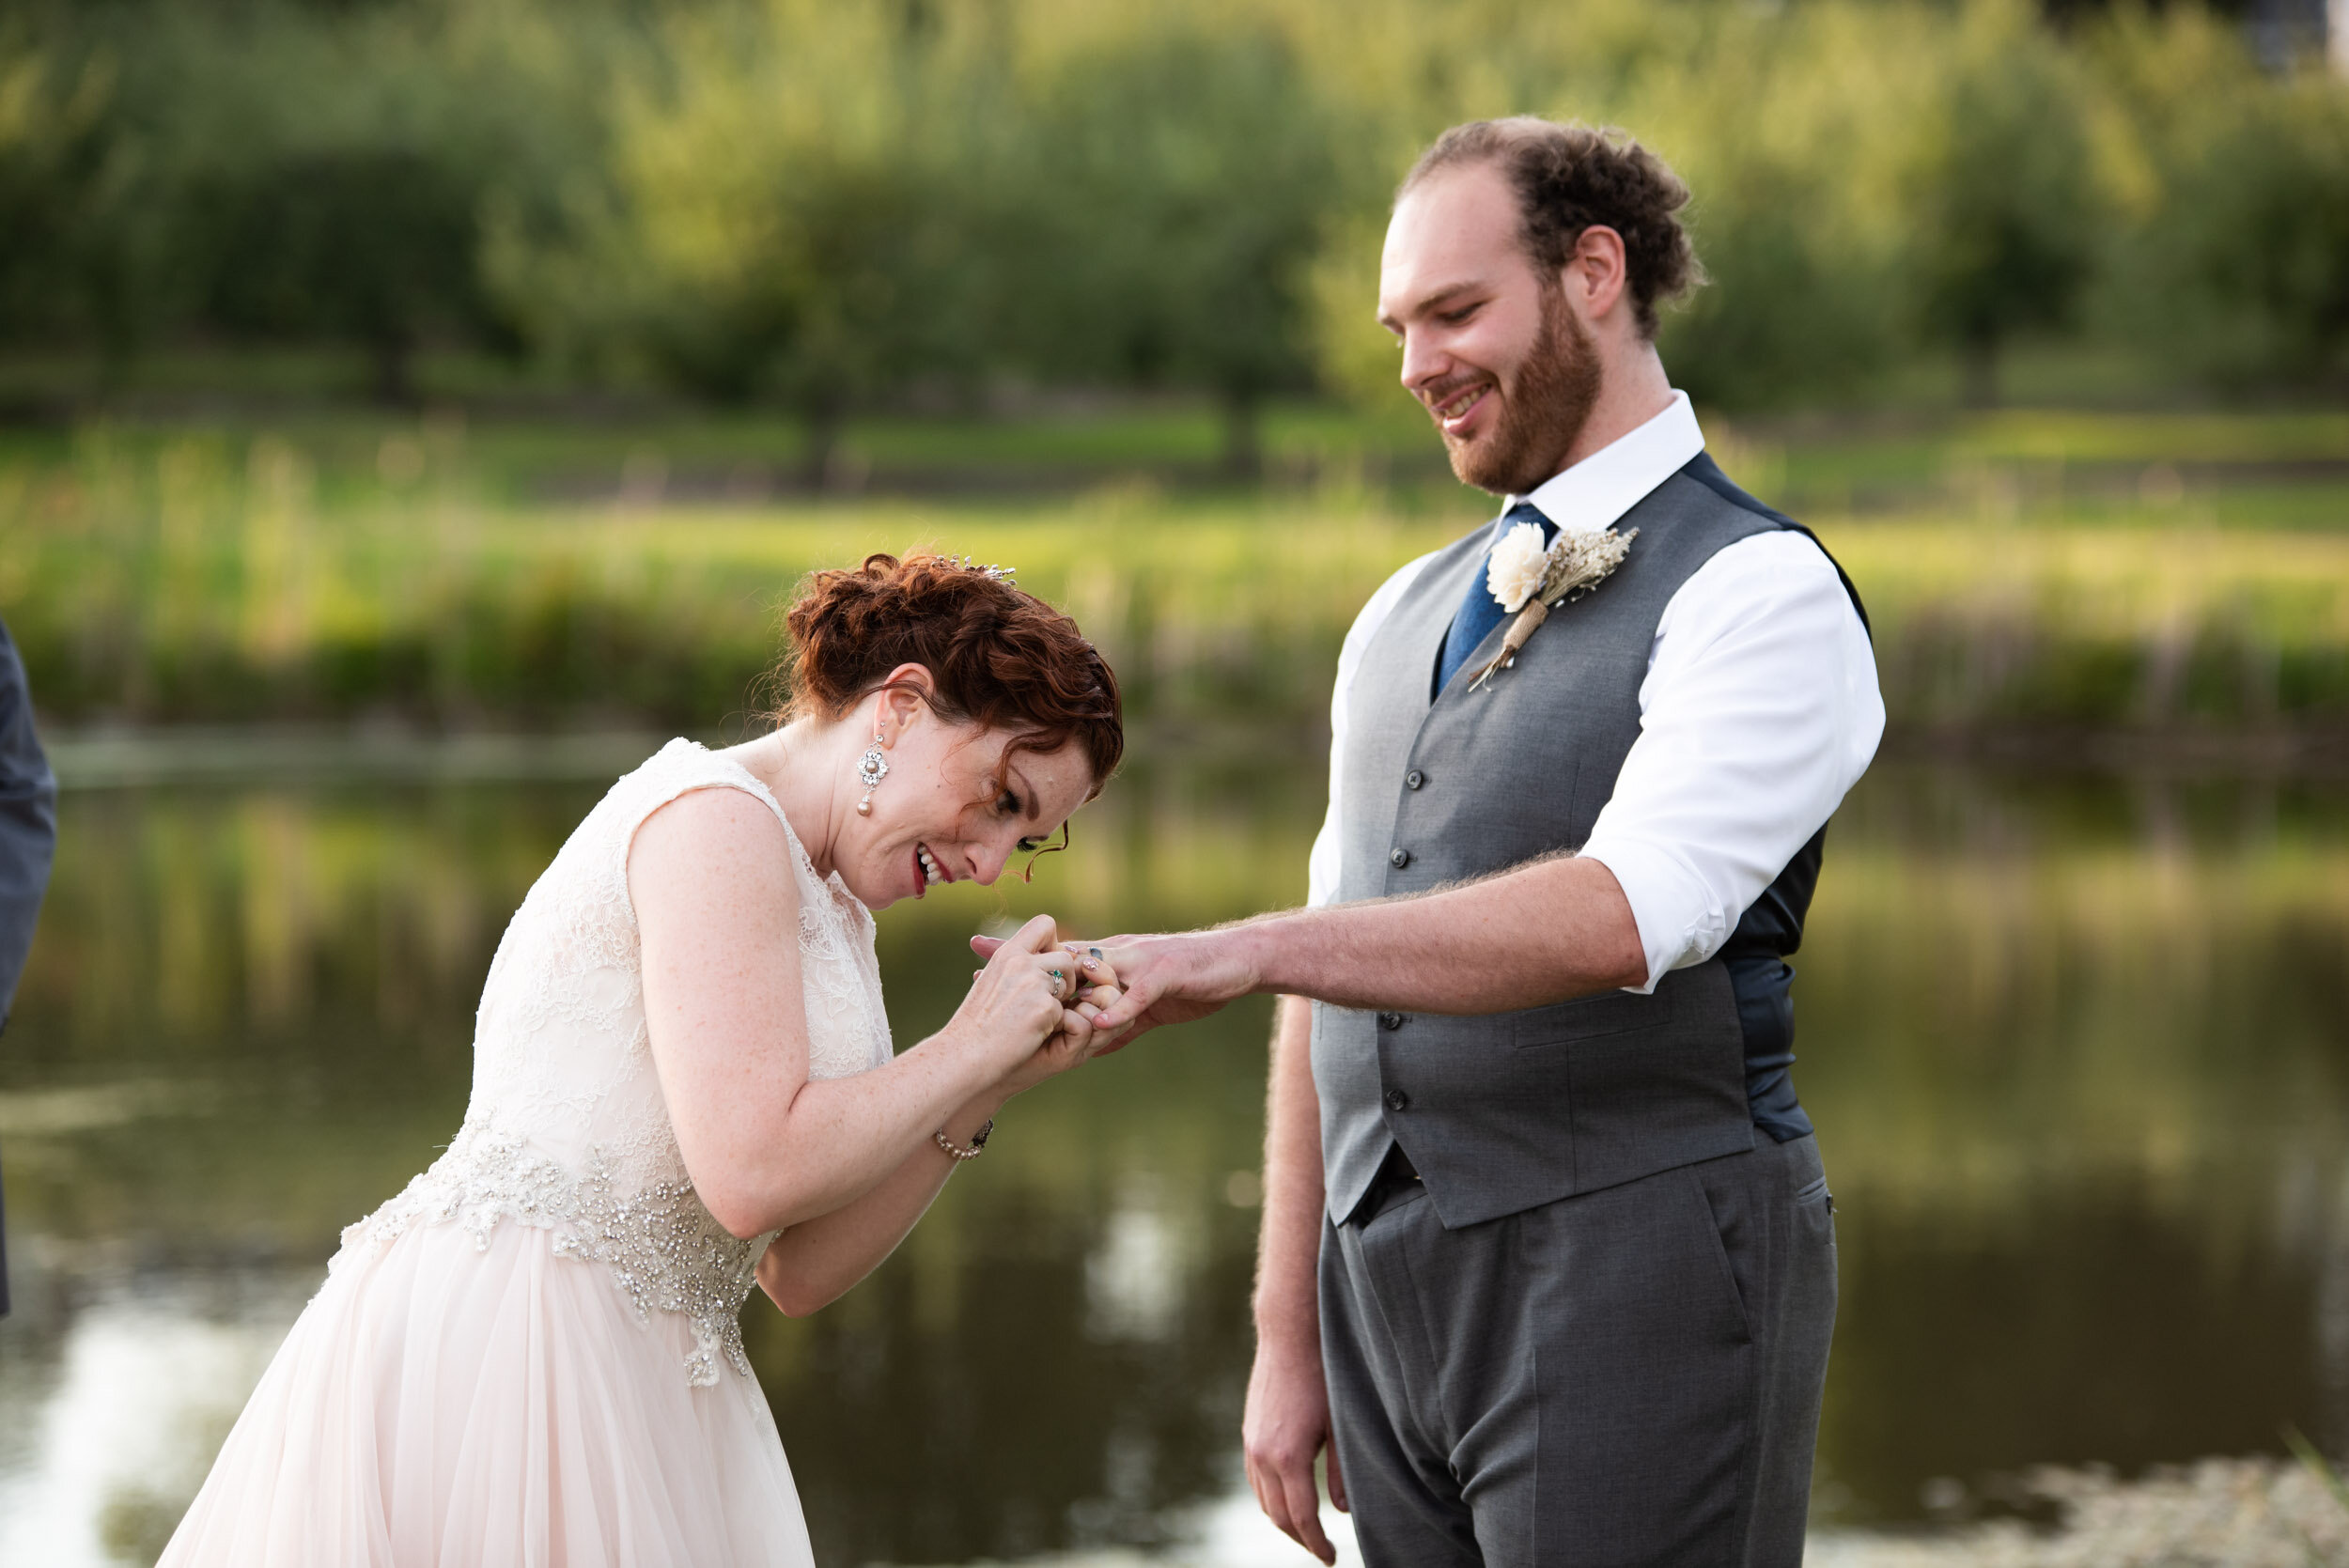 Heidi and Paul's wedding at Meadowbrook Orchards in Sterling, MA photographed by Kara Emily Krantz Photography